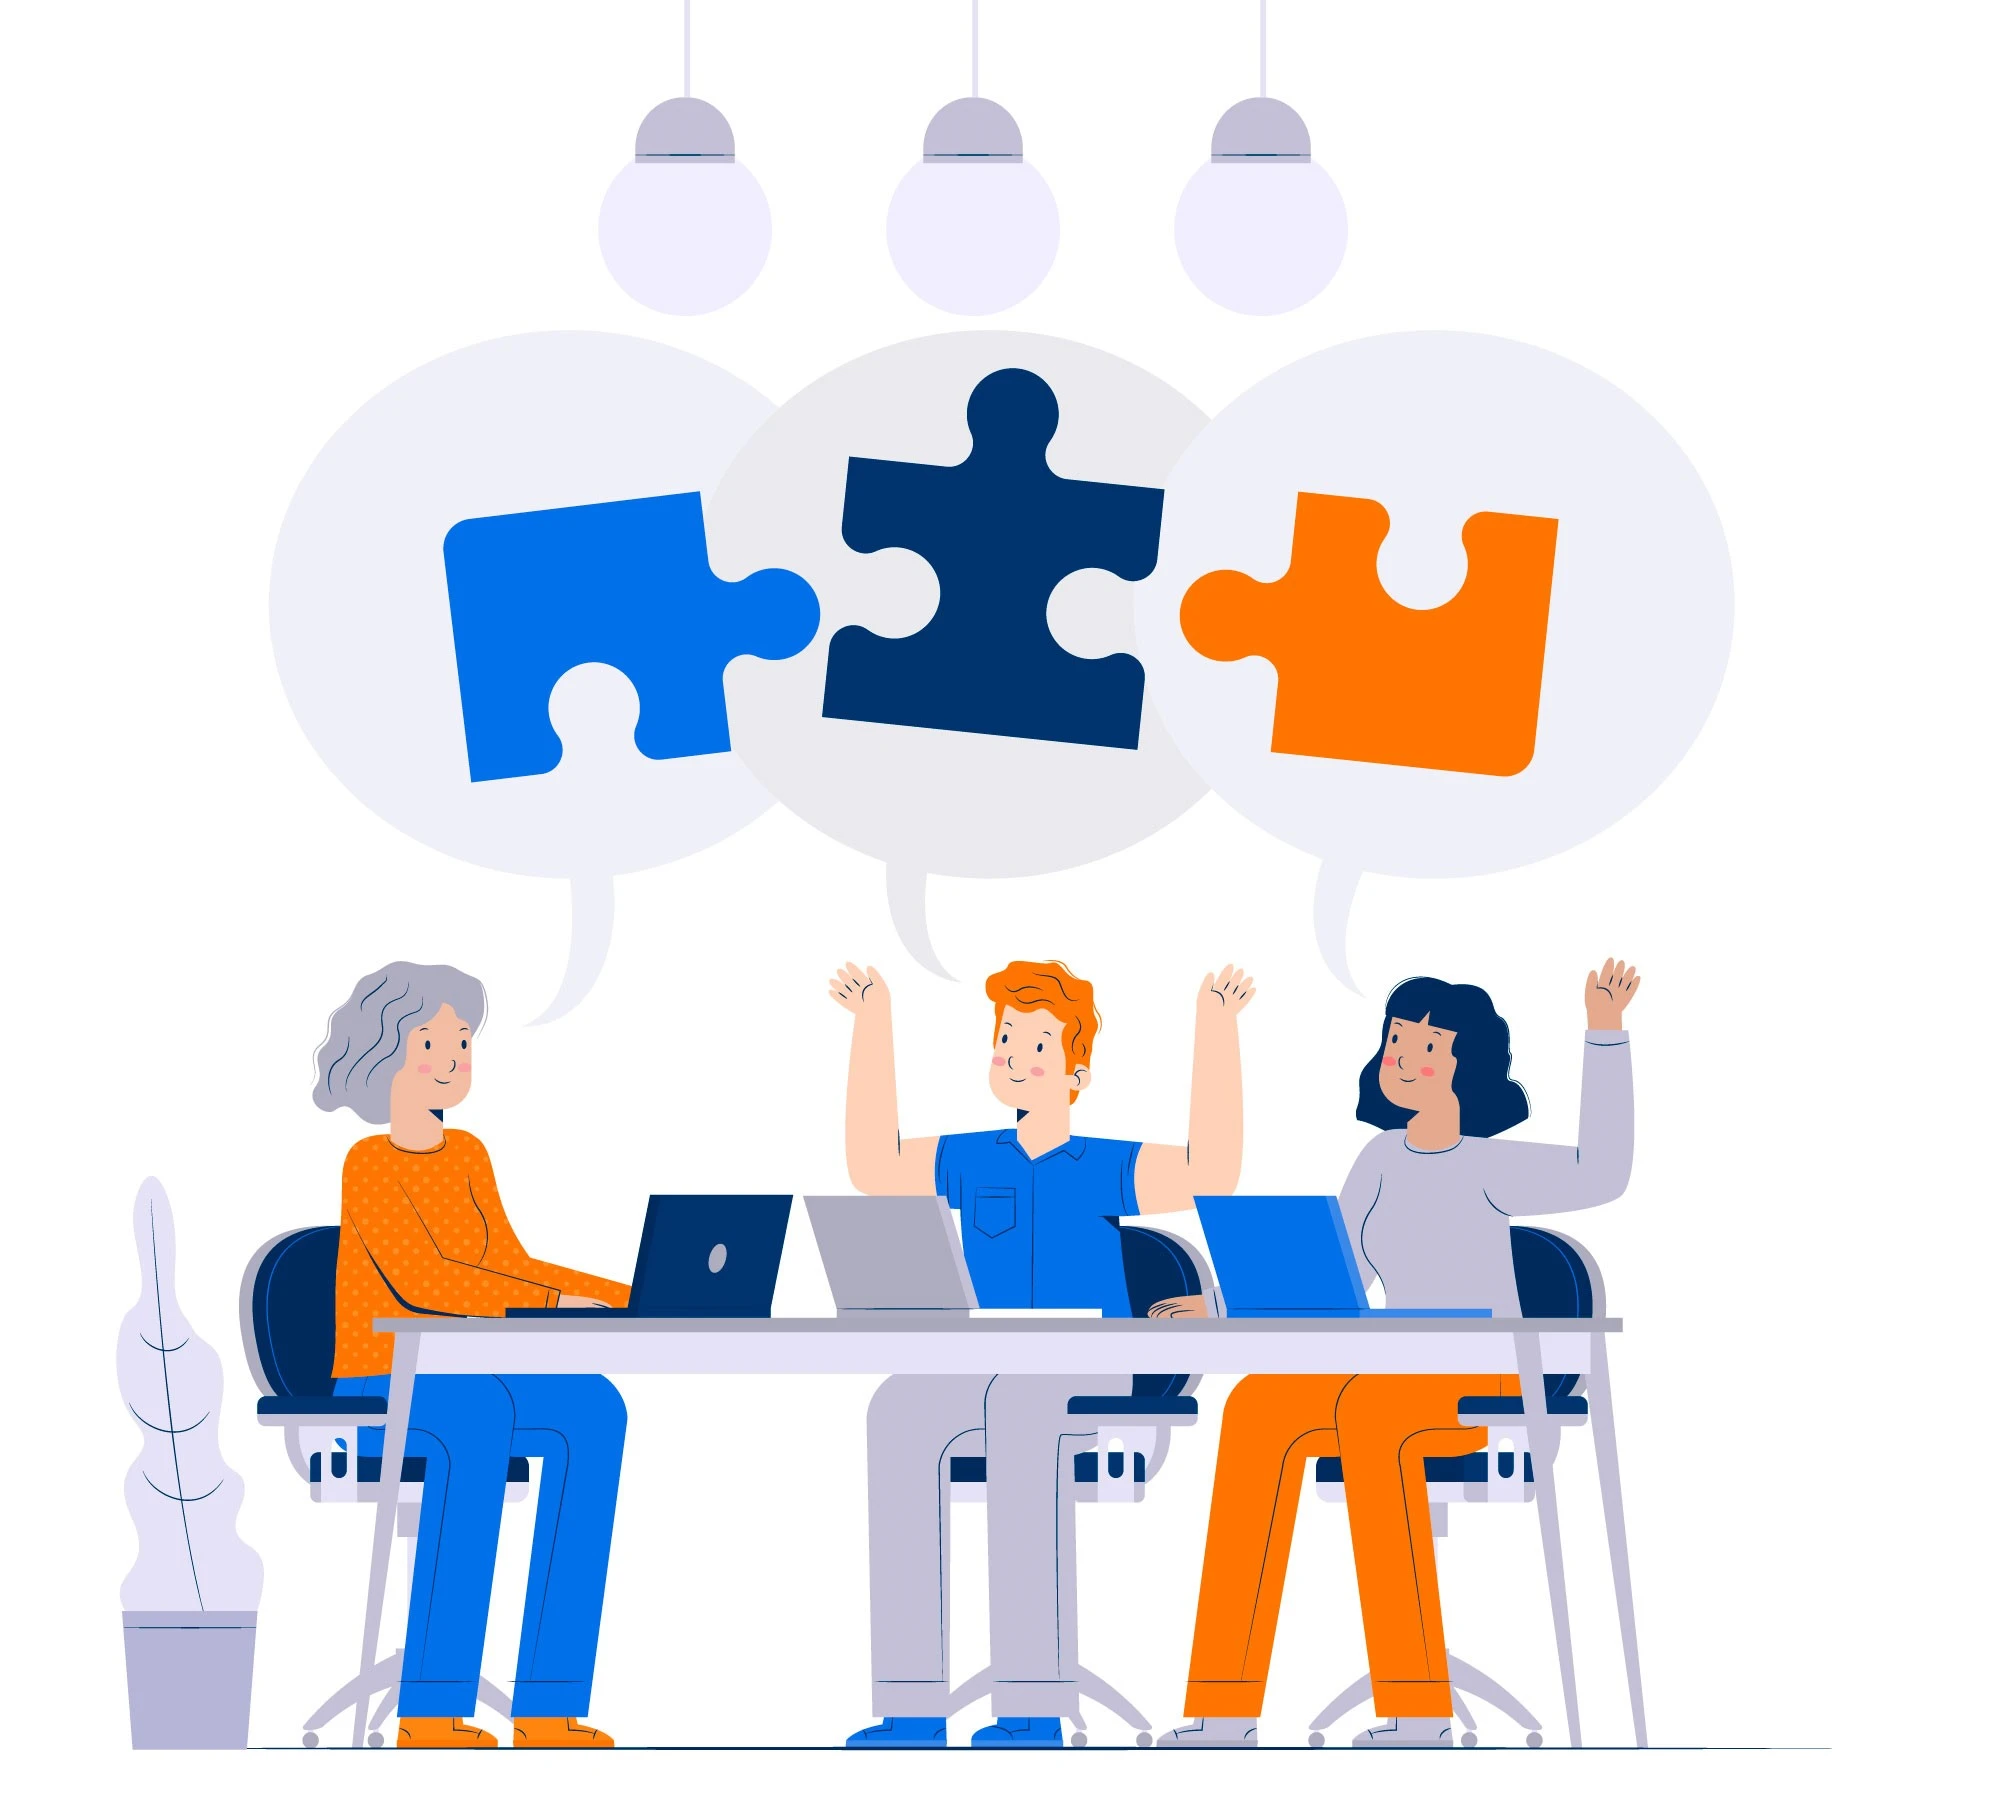 UniversalMed Supply expert team: insurance and product specialists collaborating, depicted in a graphic illustration